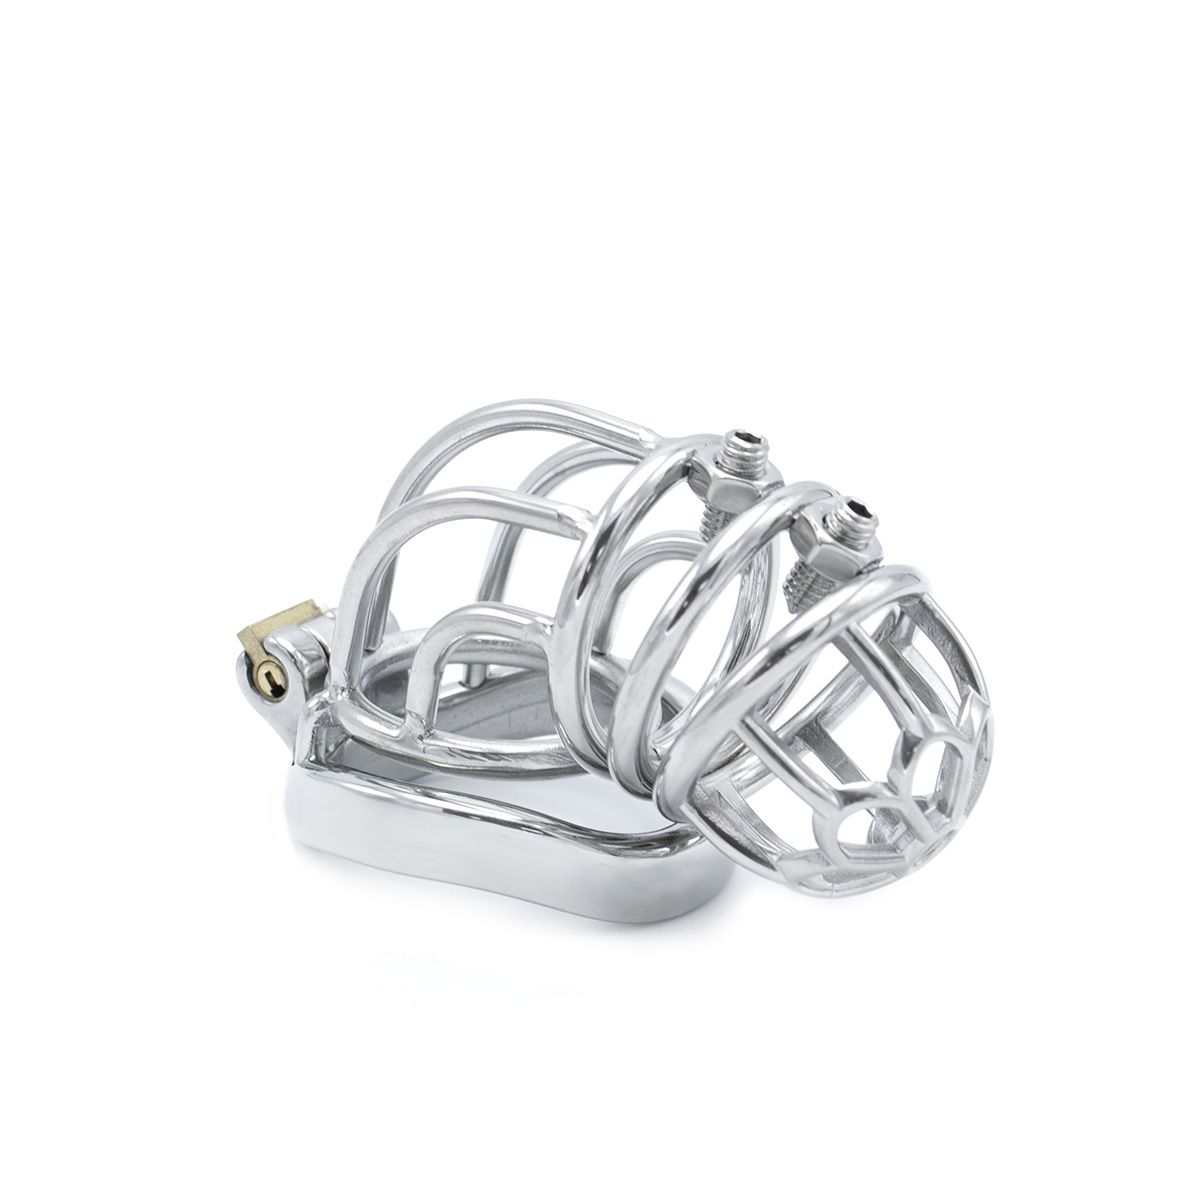 The Curve Torture Chastity Device